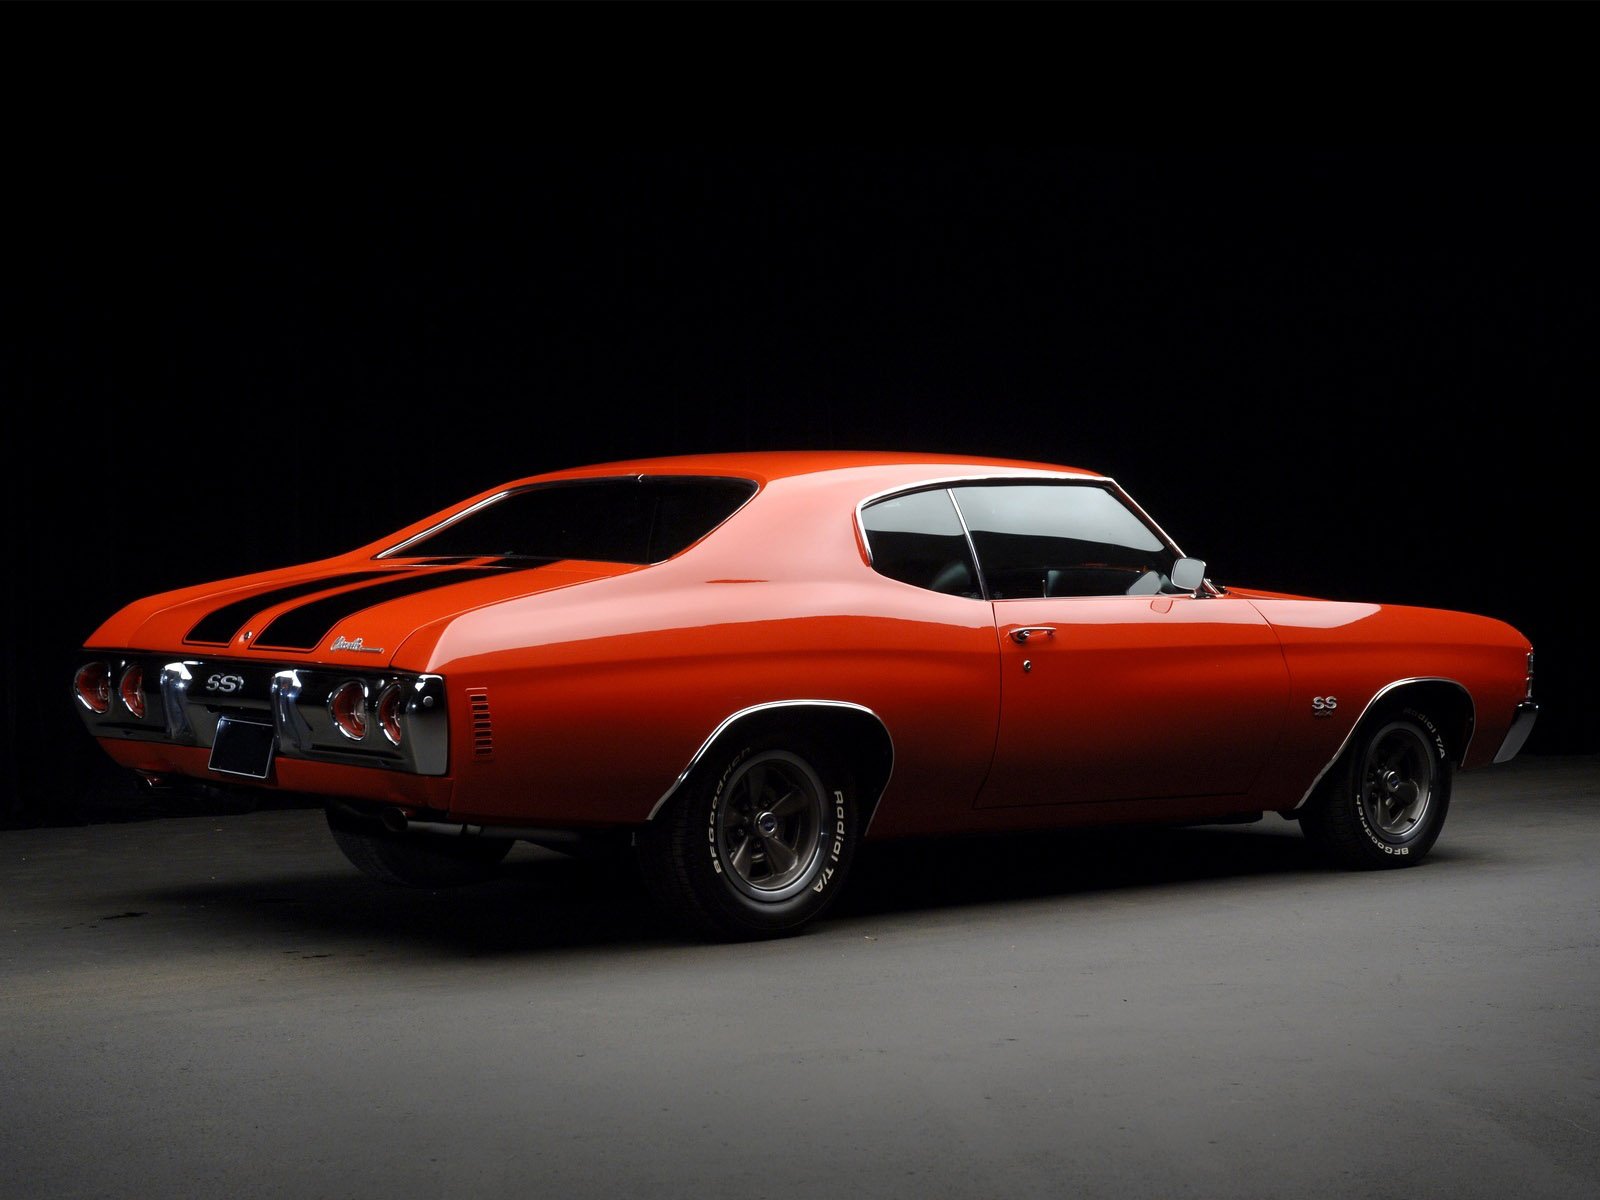 1971 Chevrolet Chevelle S S classic muscle f wallpaper background